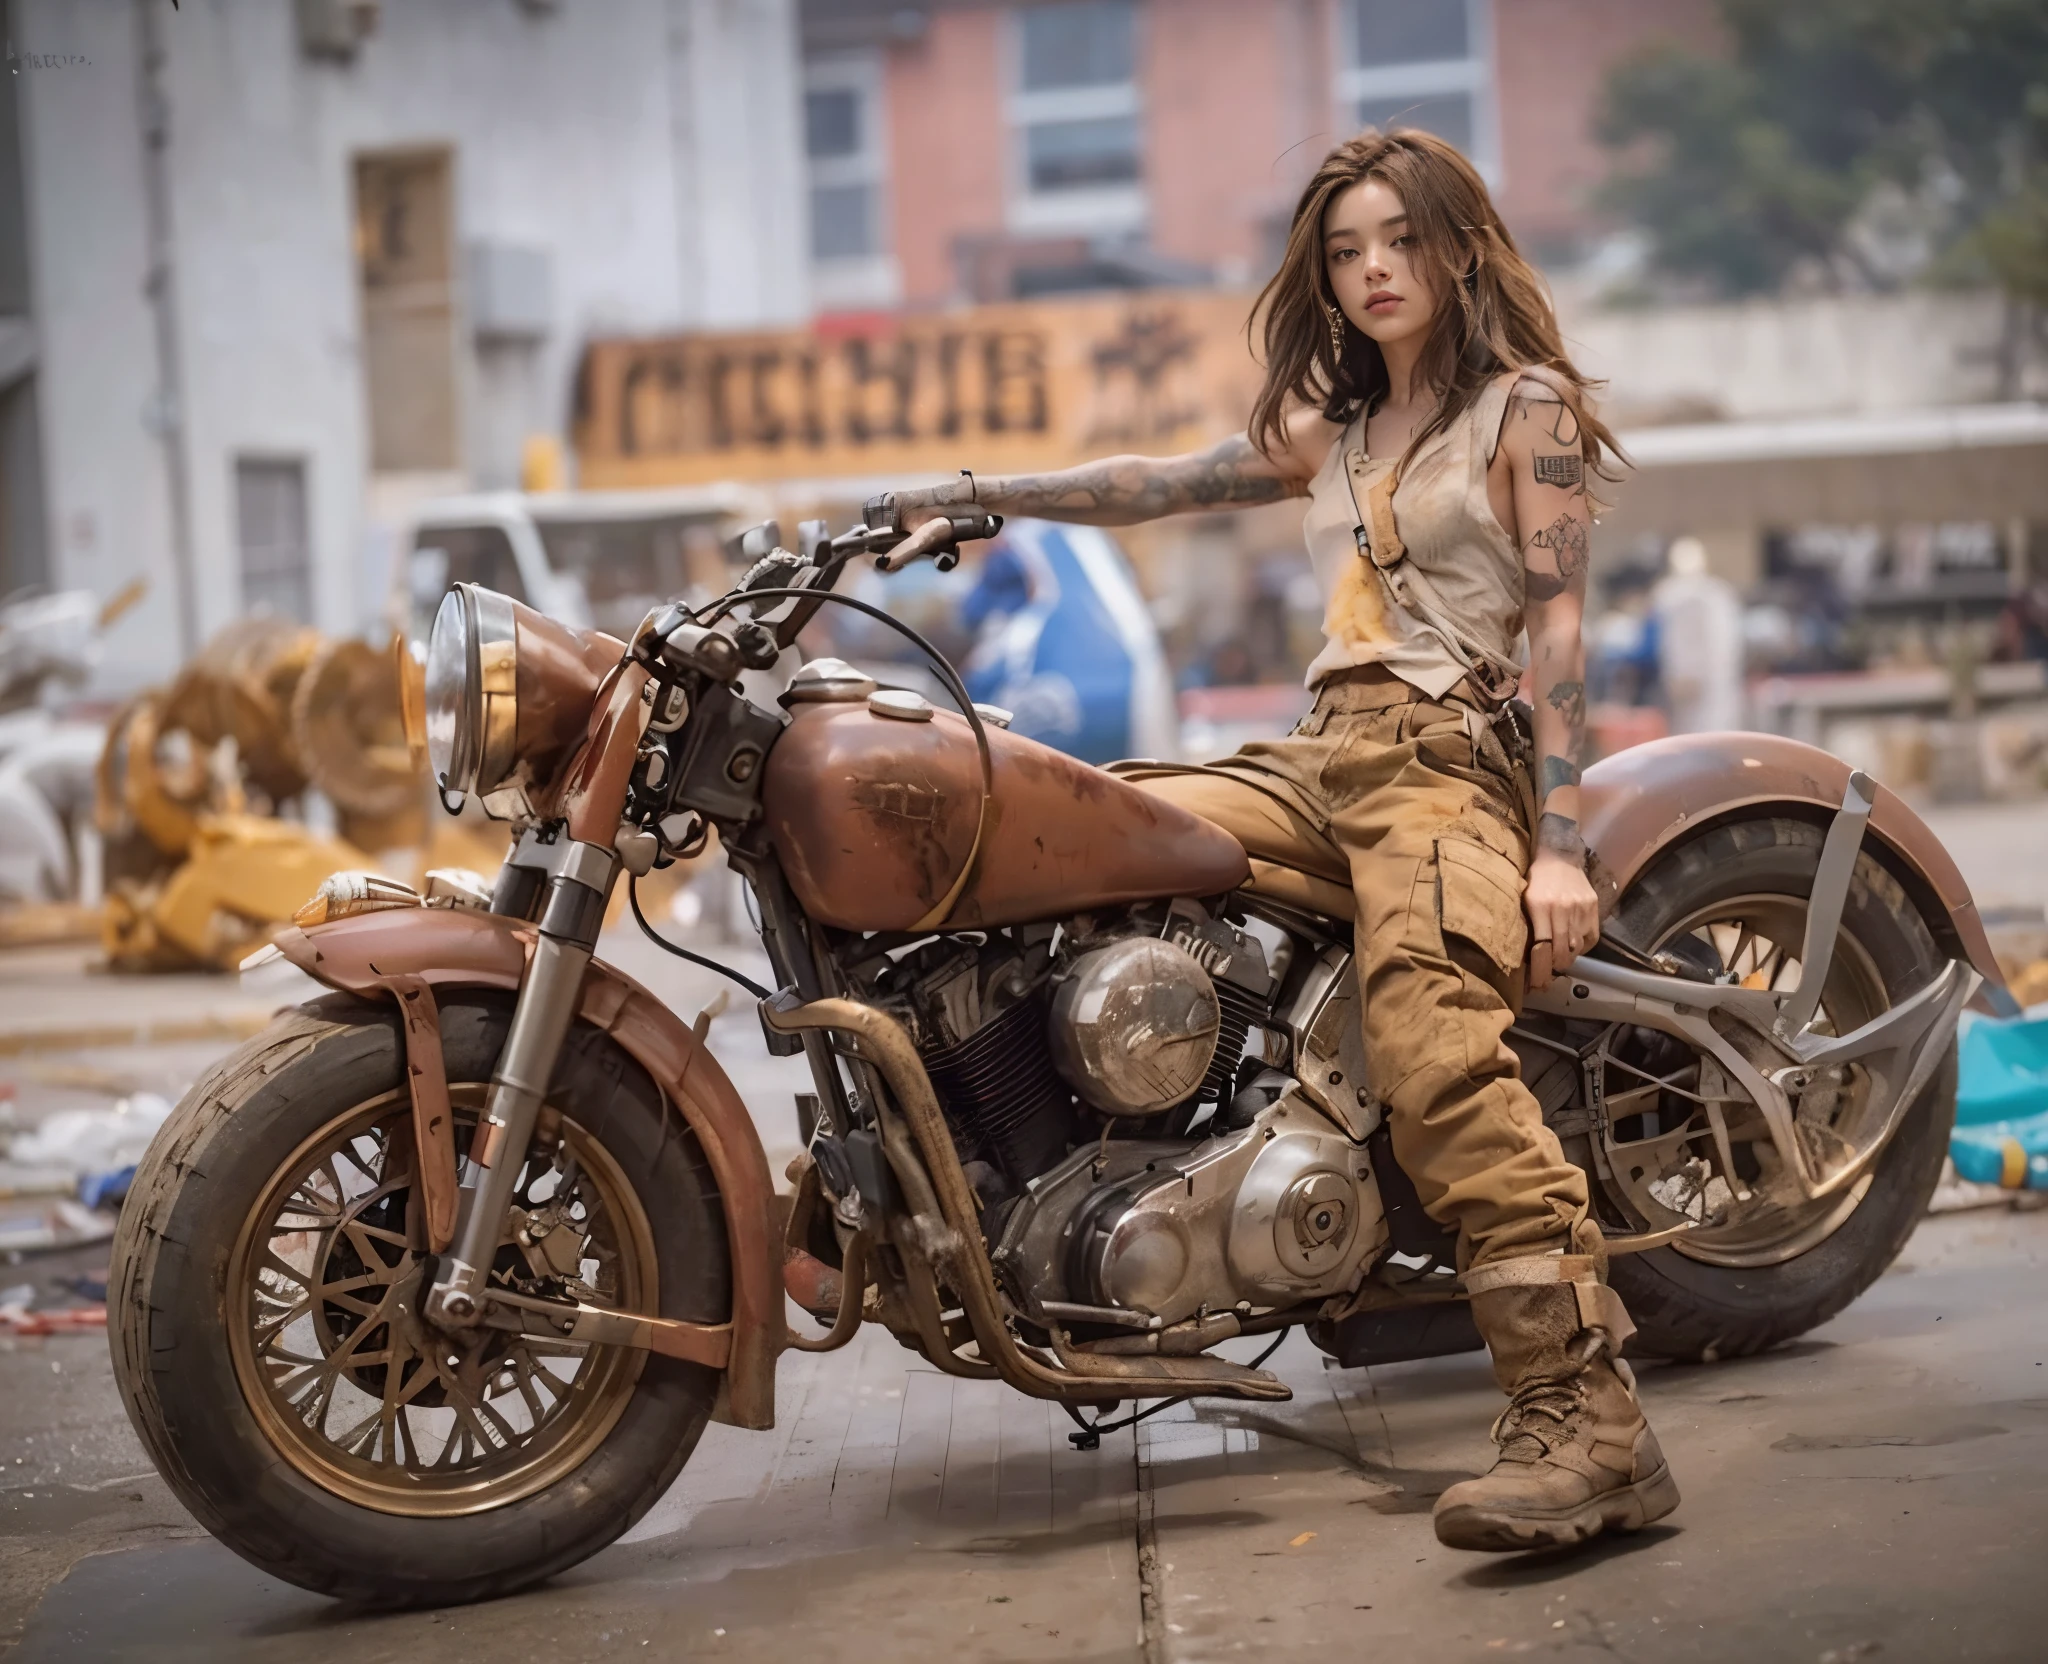 Beauty、dirty clothes、dreadlocks、rusty motorcycle、A girl with a realistic skin texture is standing in front of a concrete background. Her dirty shirt adds a sense of roughness to the overall image. She has a tattoo on her arm, which adds a hint of edge to her appearance. The focus of the image is on the ultra-detailed rendering of her skin, ensuring that every pore and wrinkle is depicted with precision. The background sets the mood with its industrial, urban feel. Lighting plays a crucial role in enhancing the realistic and photorealistic effect of the image. The colors are vivid and the details are sharp, resulting in the best quality 8k image that resembles a masterpiece.、